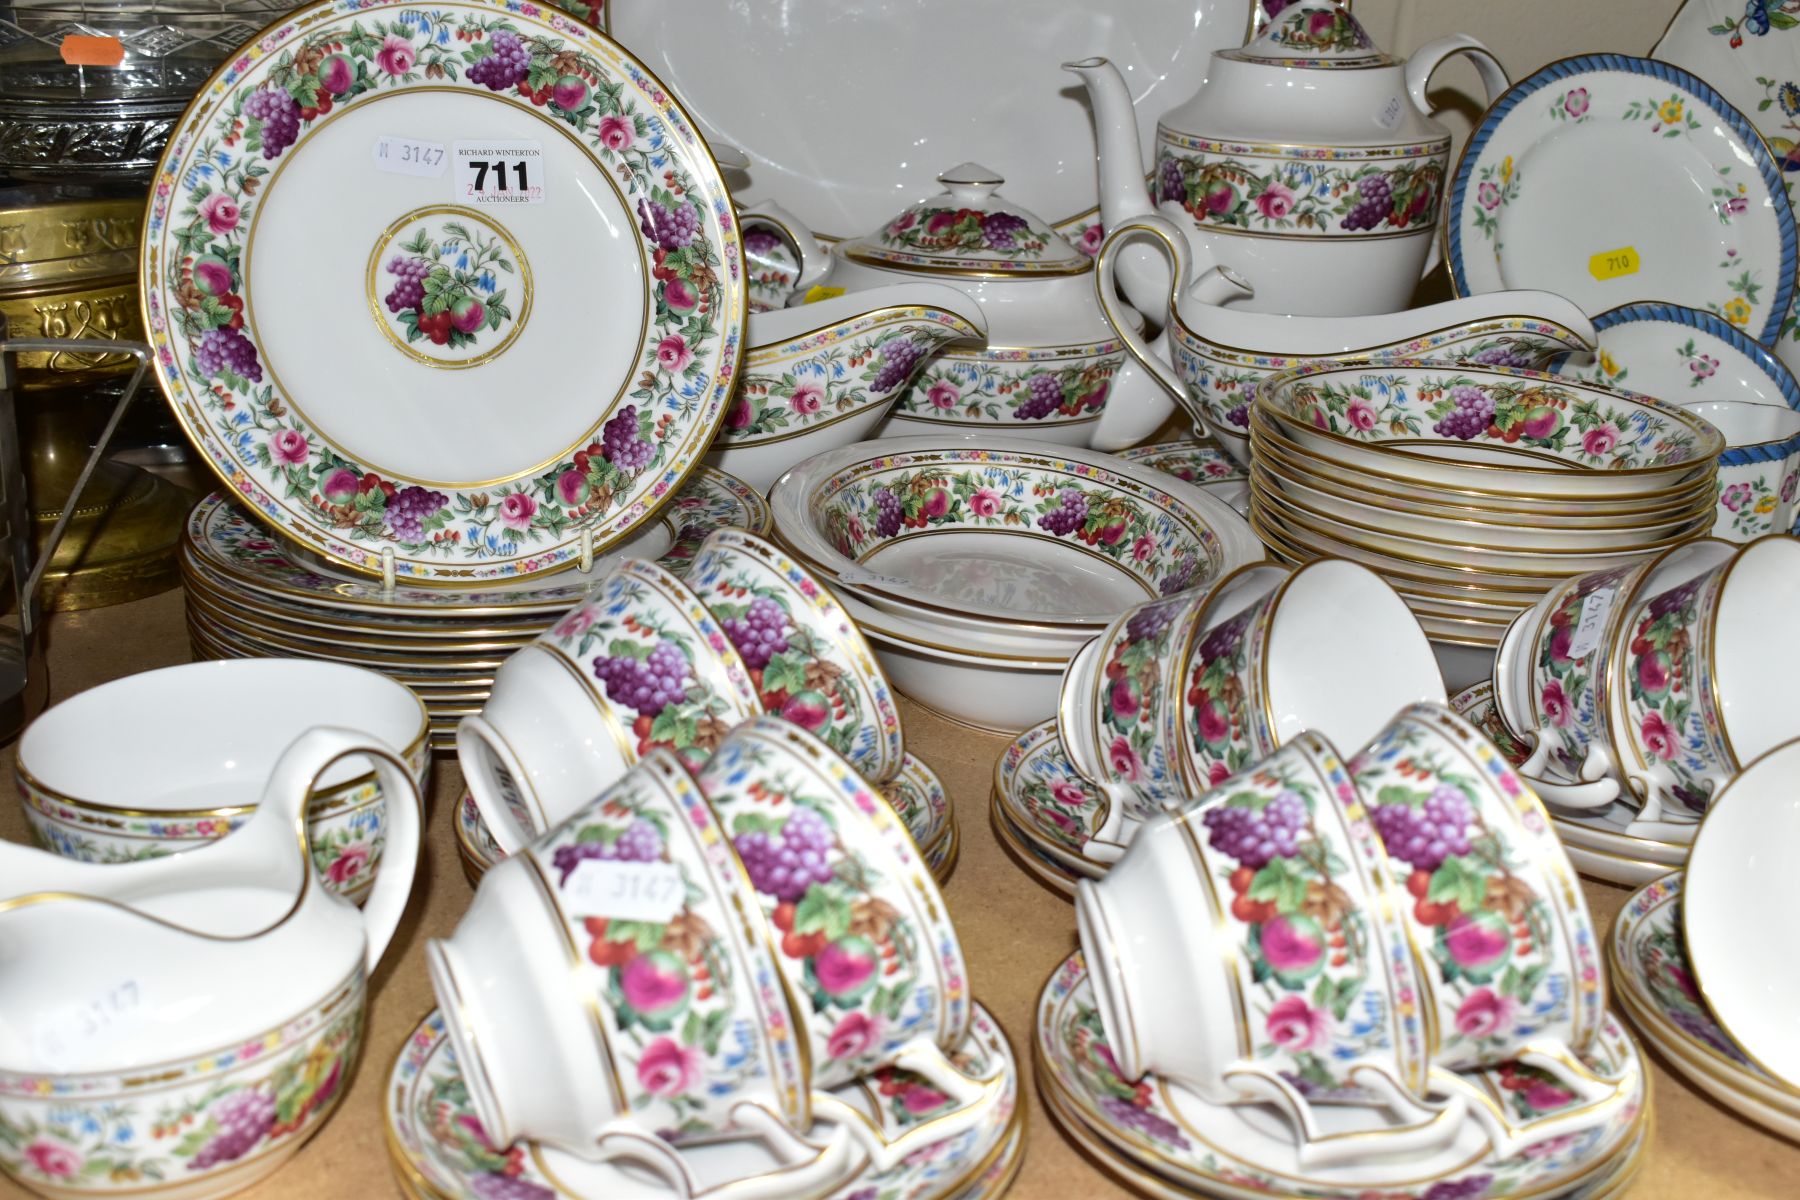 A FIFTY SIX PIECE SPODE PROVENCE DINNER SERVICE, with fruit and floral pattern comprising a meat